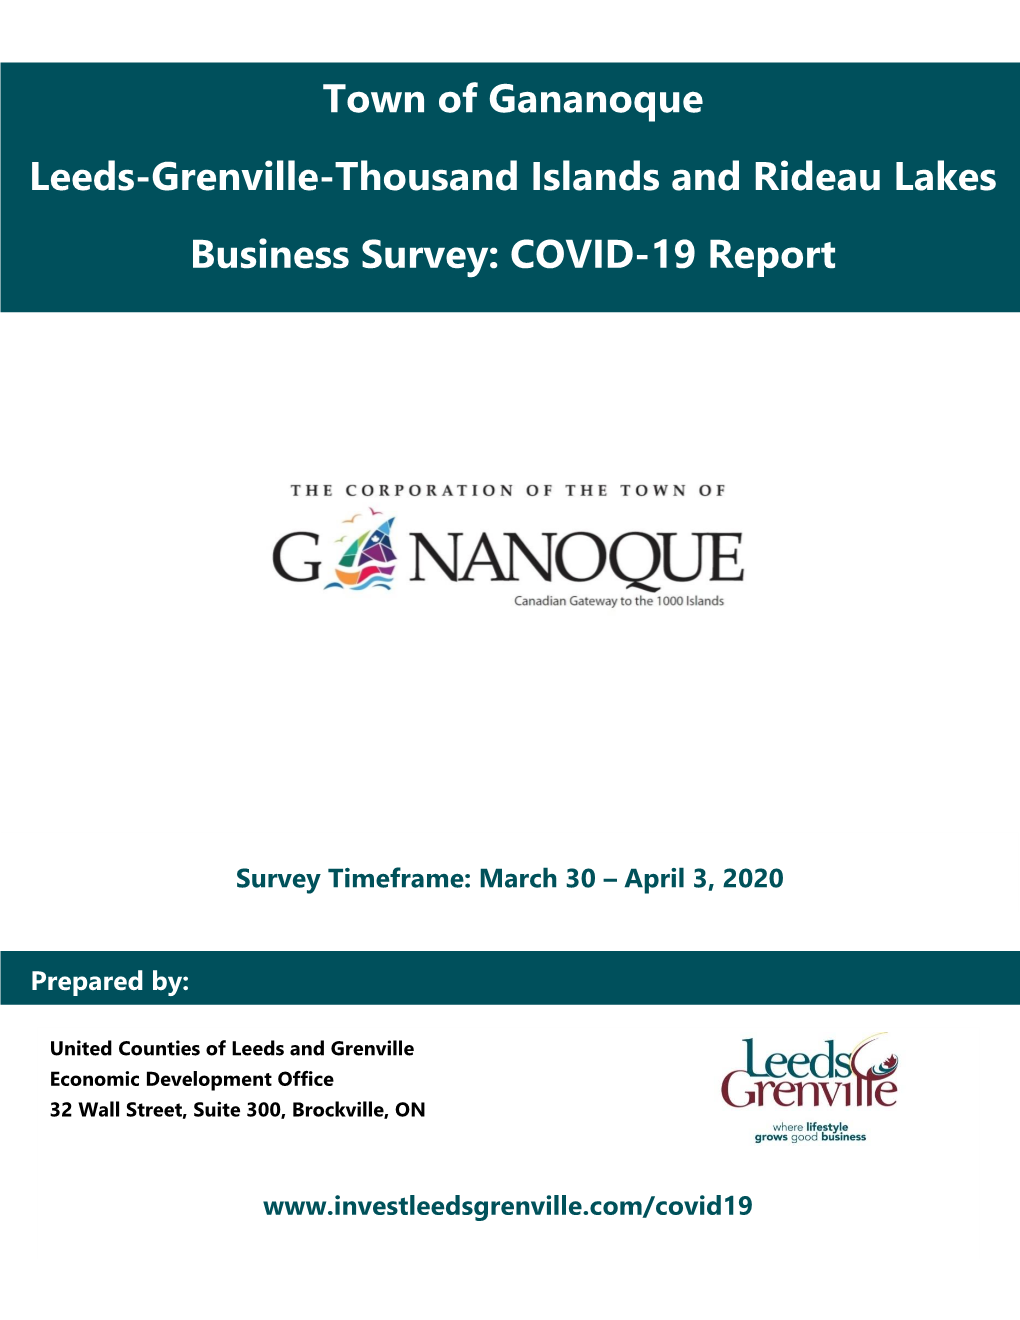 Gananoque Leeds-Grenville-Thousand Islands and Rideau Lakes Business Survey: COVID-19 Report